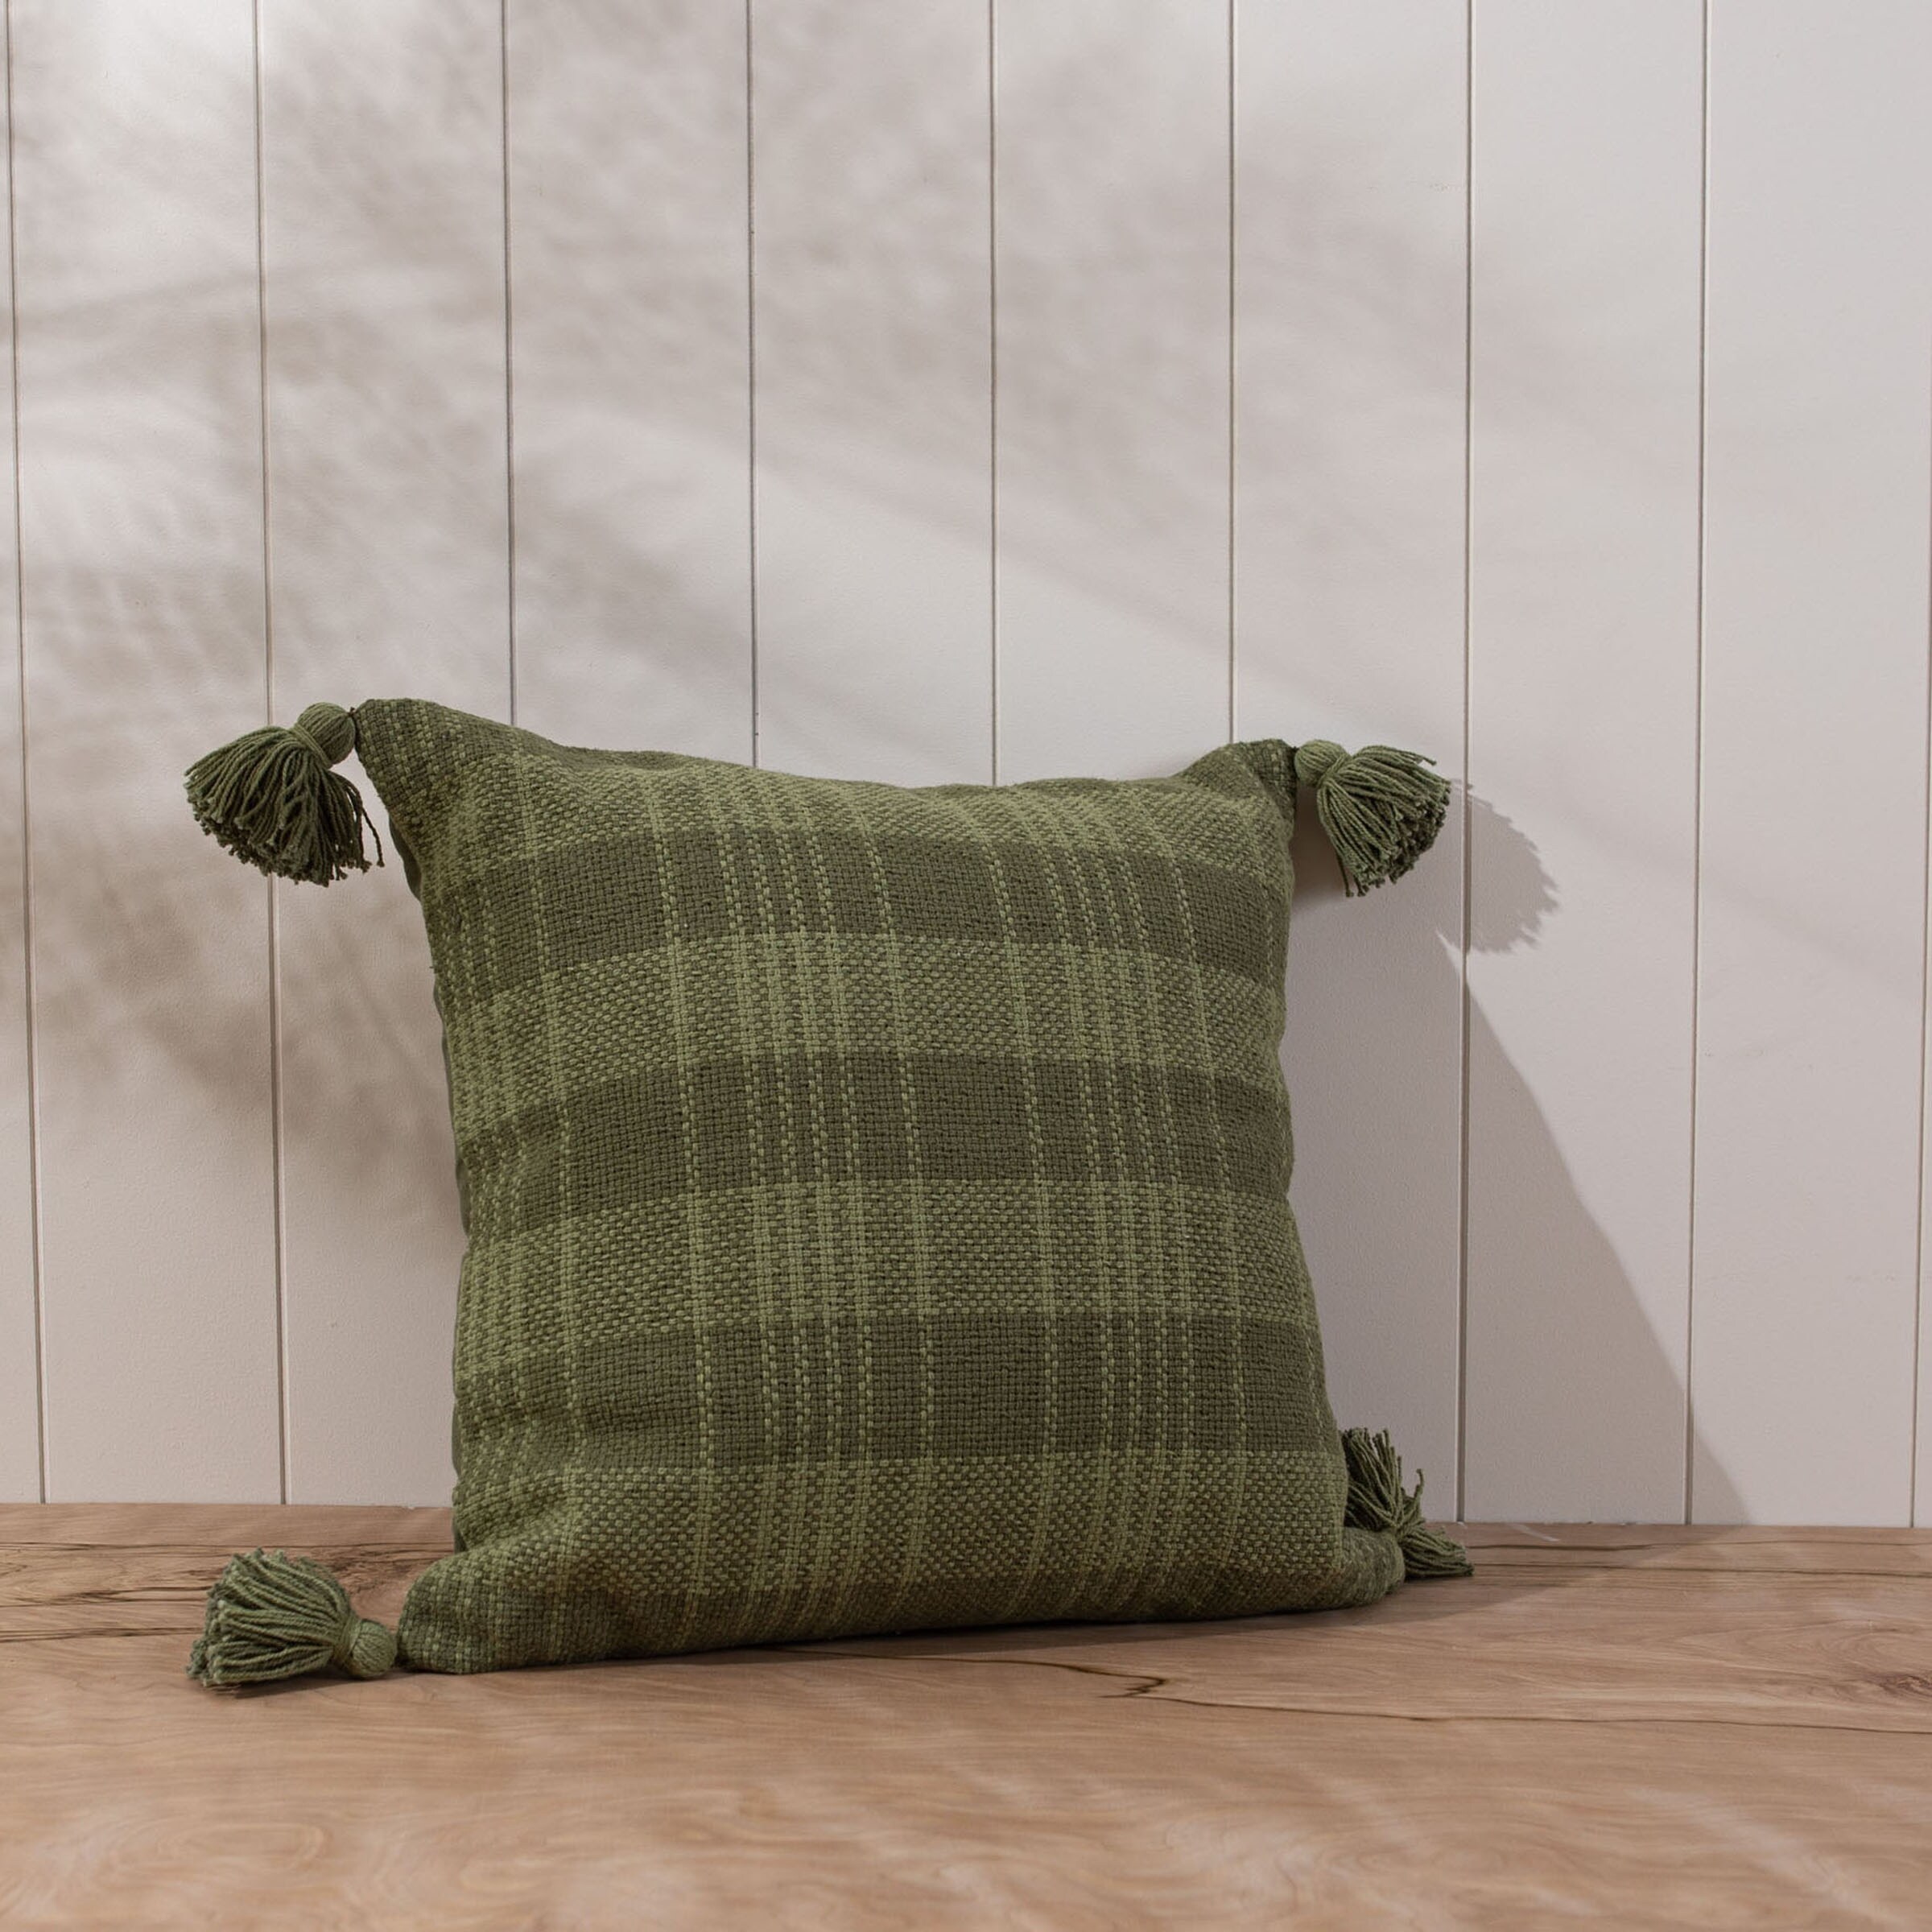 https://ak1.ostkcdn.com/images/products/is/images/direct/c80f44a00a5d9da6d3c83ce20a43ff6bdb15f5c9/Foreside-Home-%26-Garden-Green-Plaid-18X18-Hand-Woven-Filled-Pillow.jpg